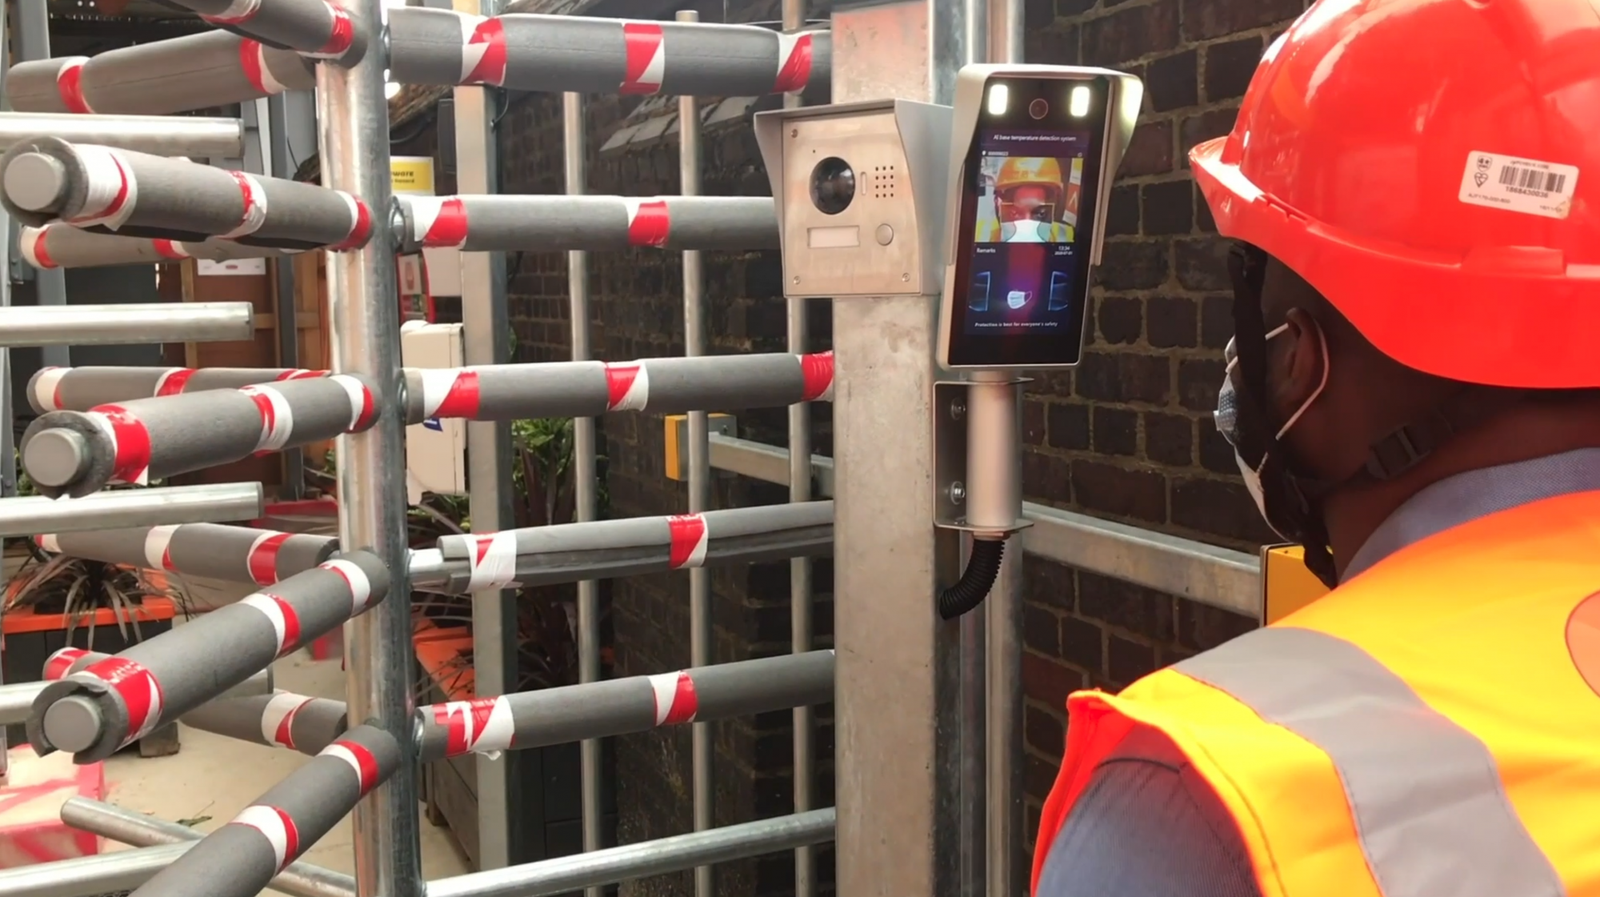 Bouygues UK integrates temperature measurement solution with access control